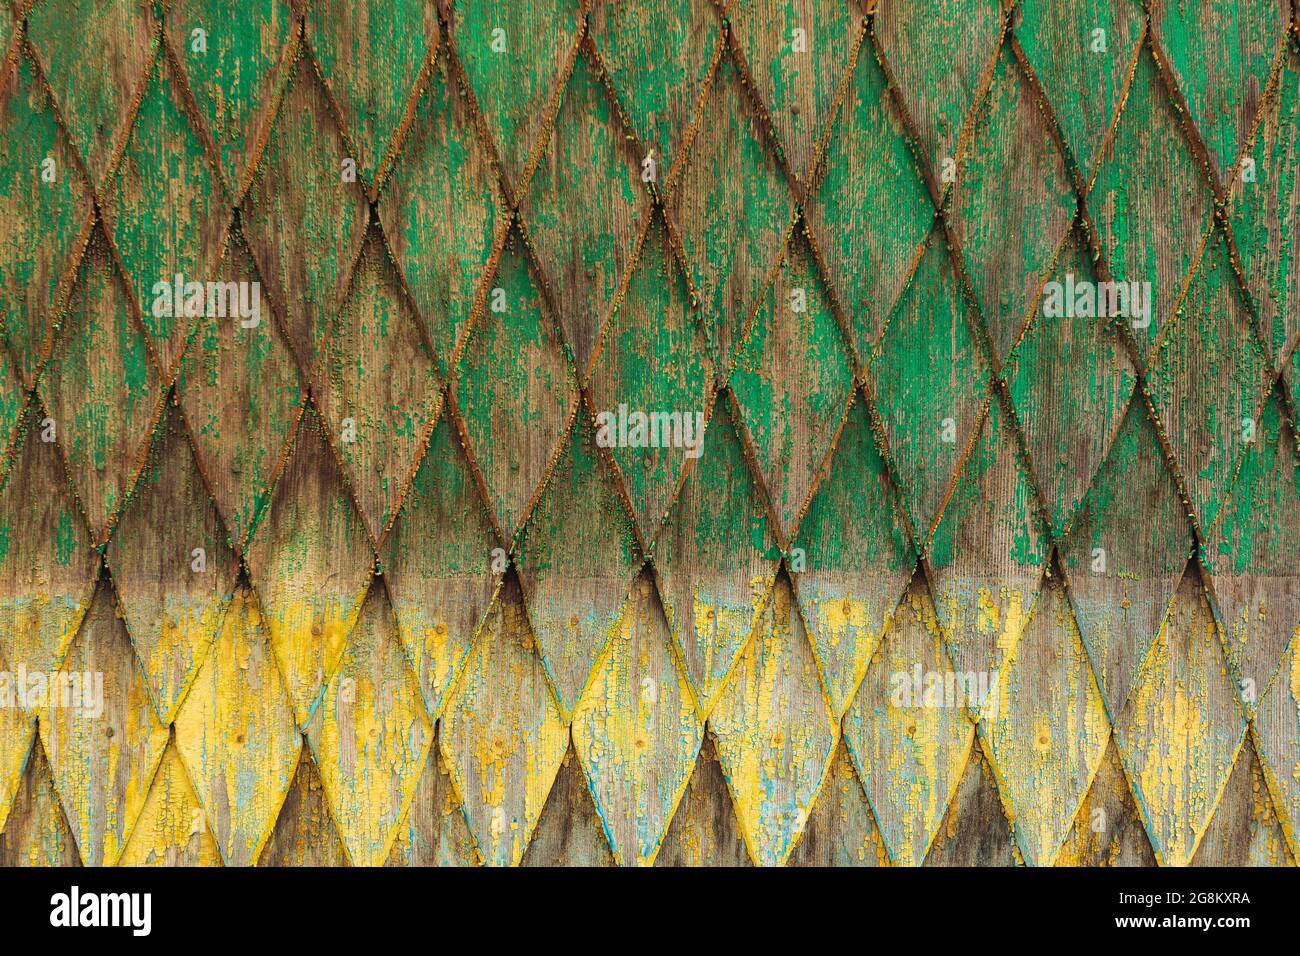 Ornamental covering on the house wall. Grunge yellow and green colored wooden coating texture Stock Photo